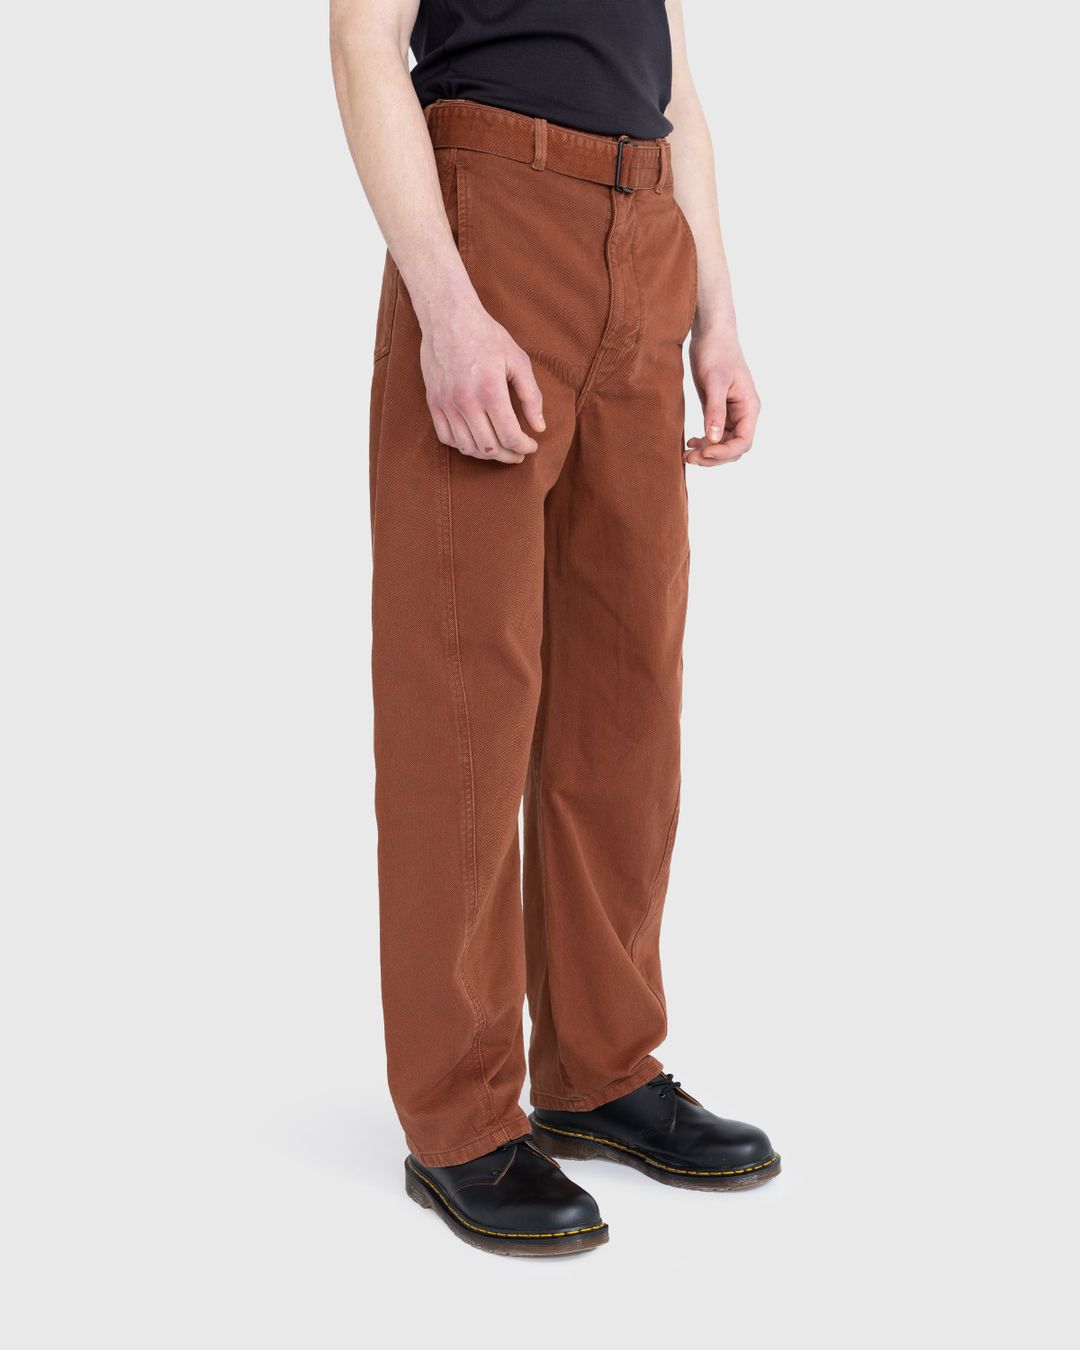 Lemaire – Twisted Belted Pants Brown | Highsnobiety Shop